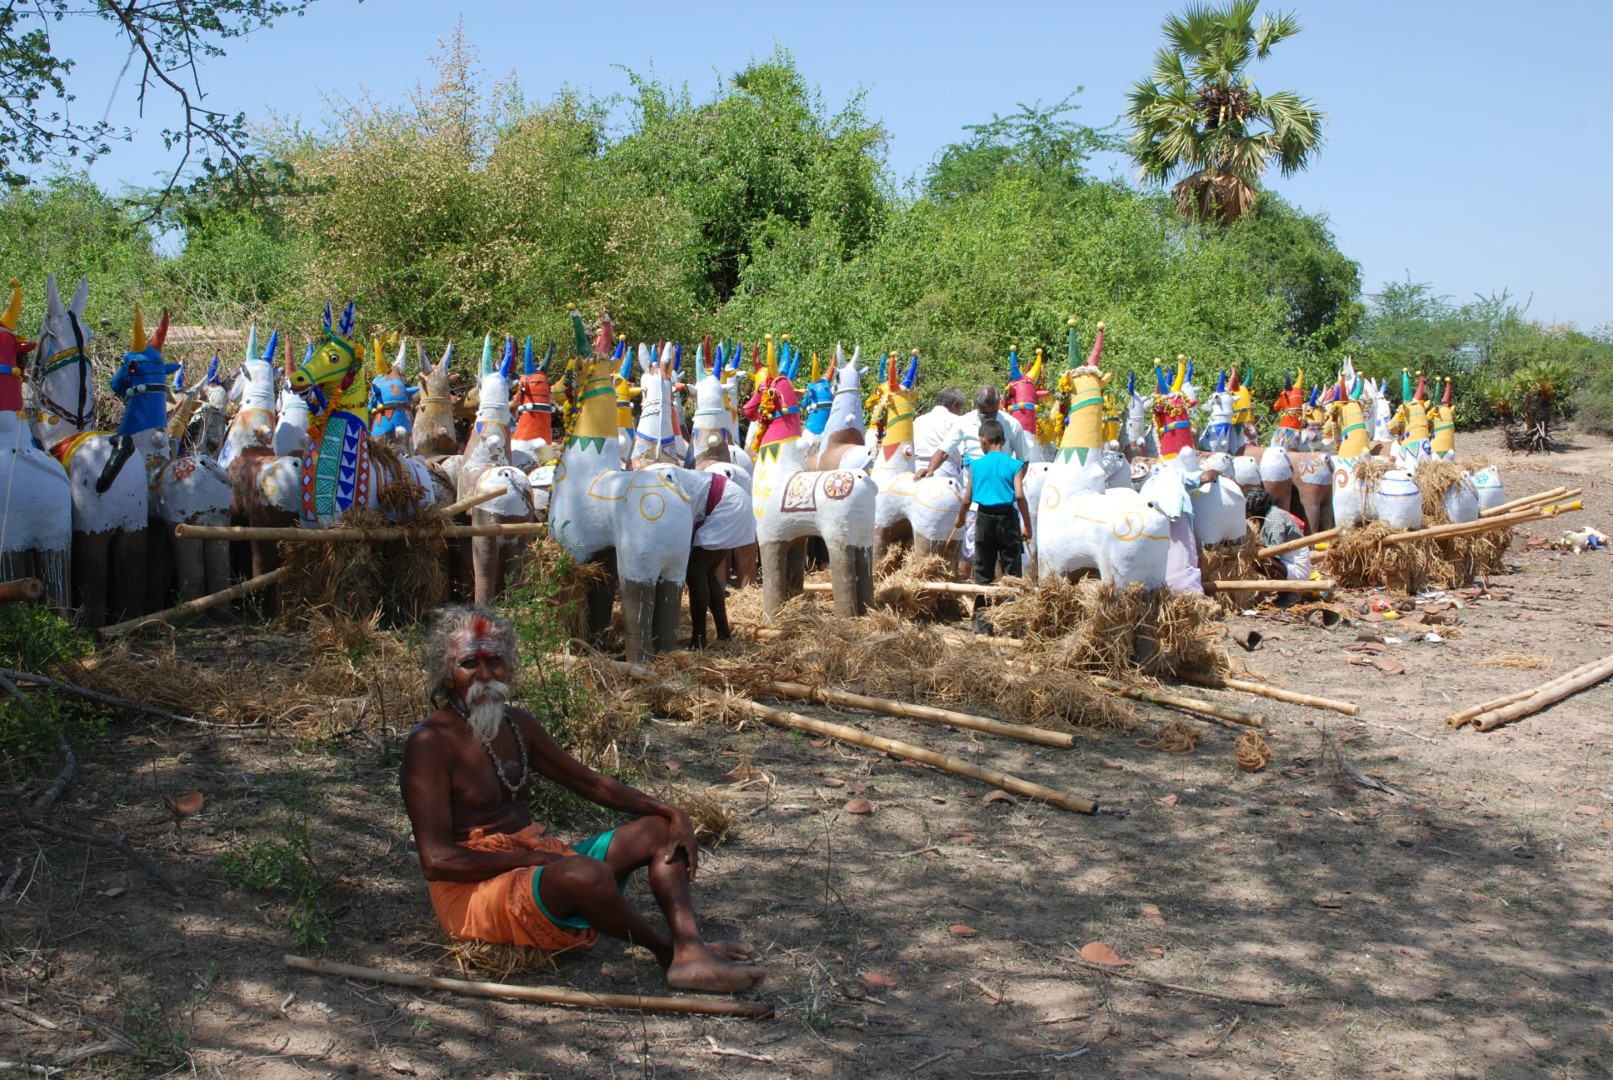 <span style="font-weight:normal;">Once the offerings are carried into the shrine, the devotees place them in their permanent place and remove the bamboo poles.</span>